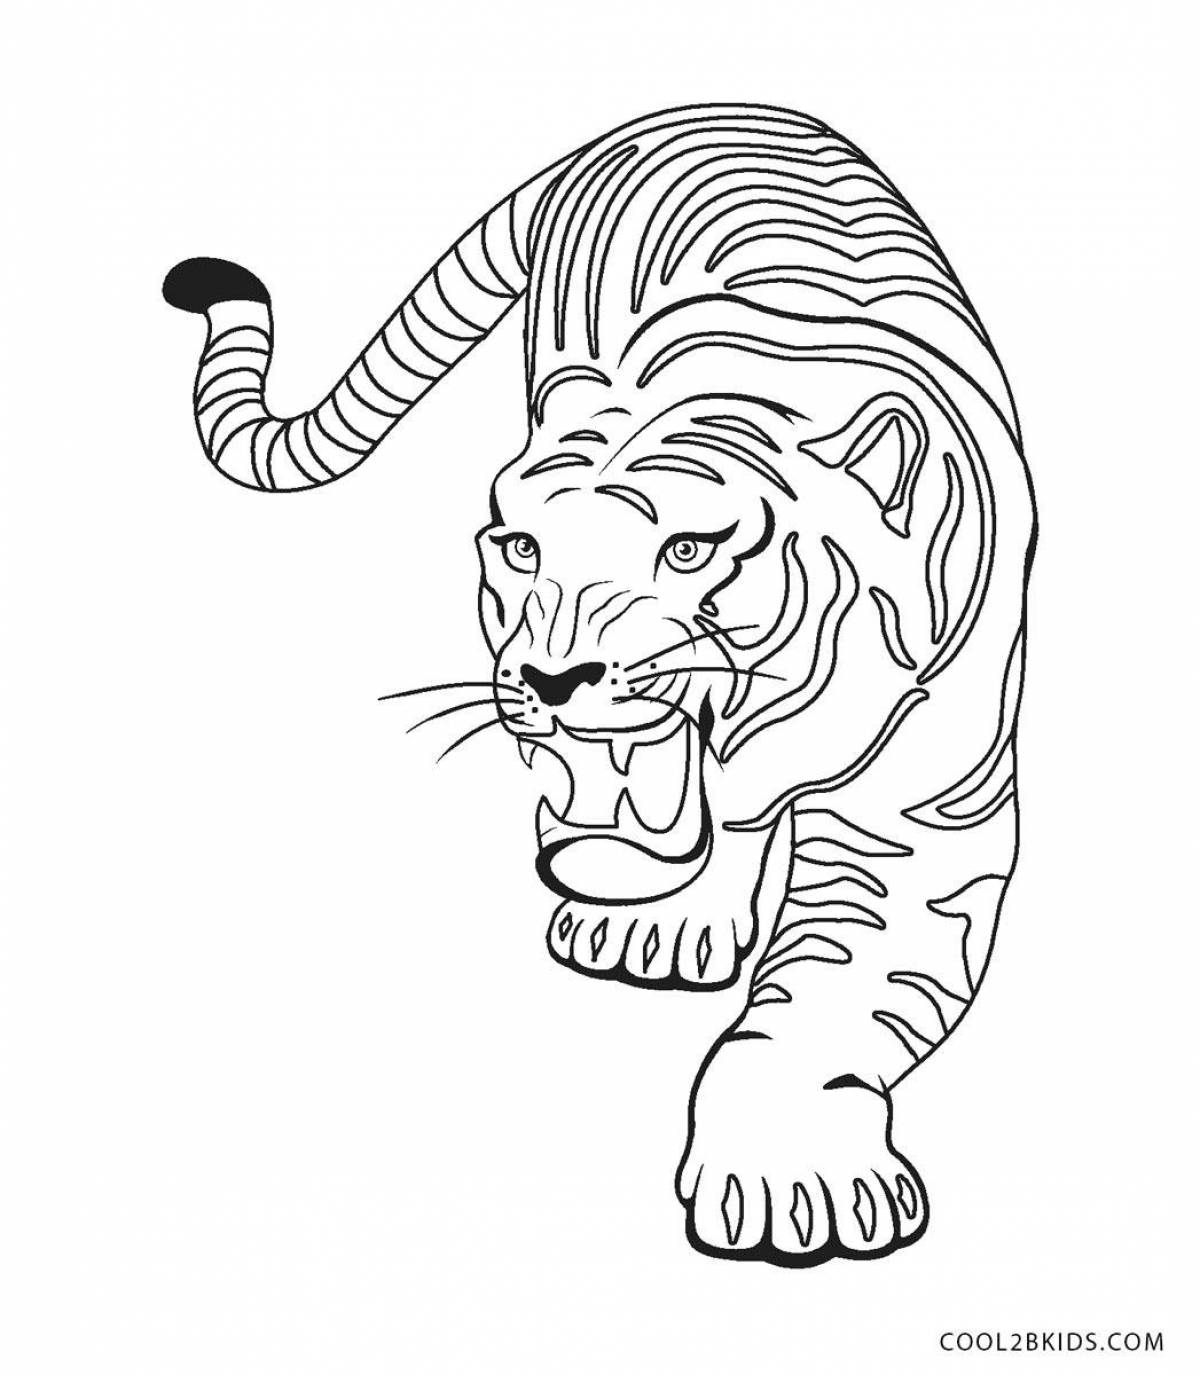 Creative tiger coloring book for kids